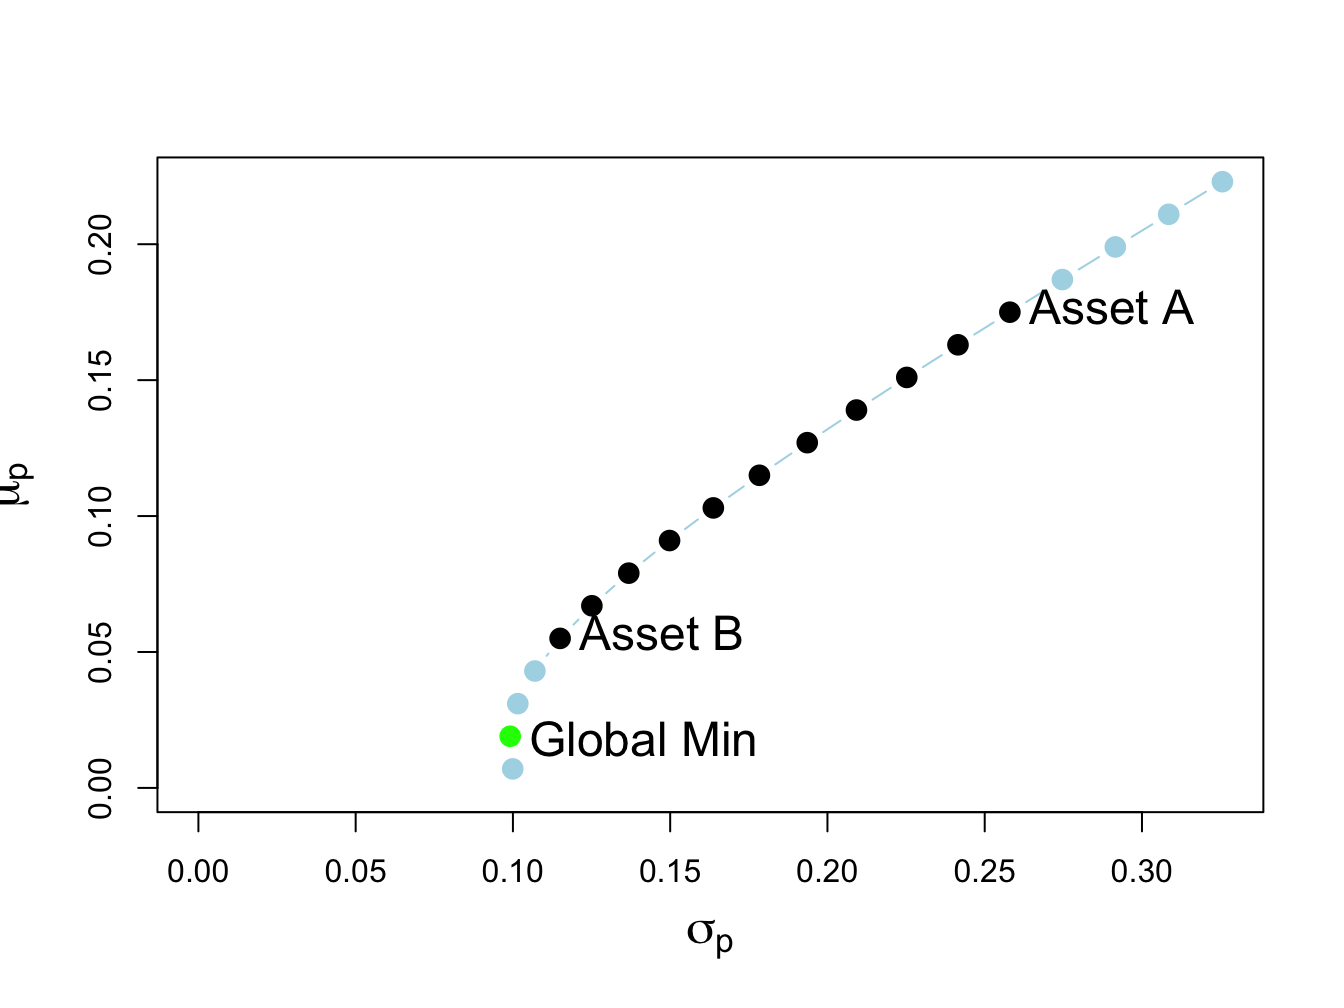 Two risky asset portfolio frontier with short sale in Asset A in the global minimum variance portfolio.